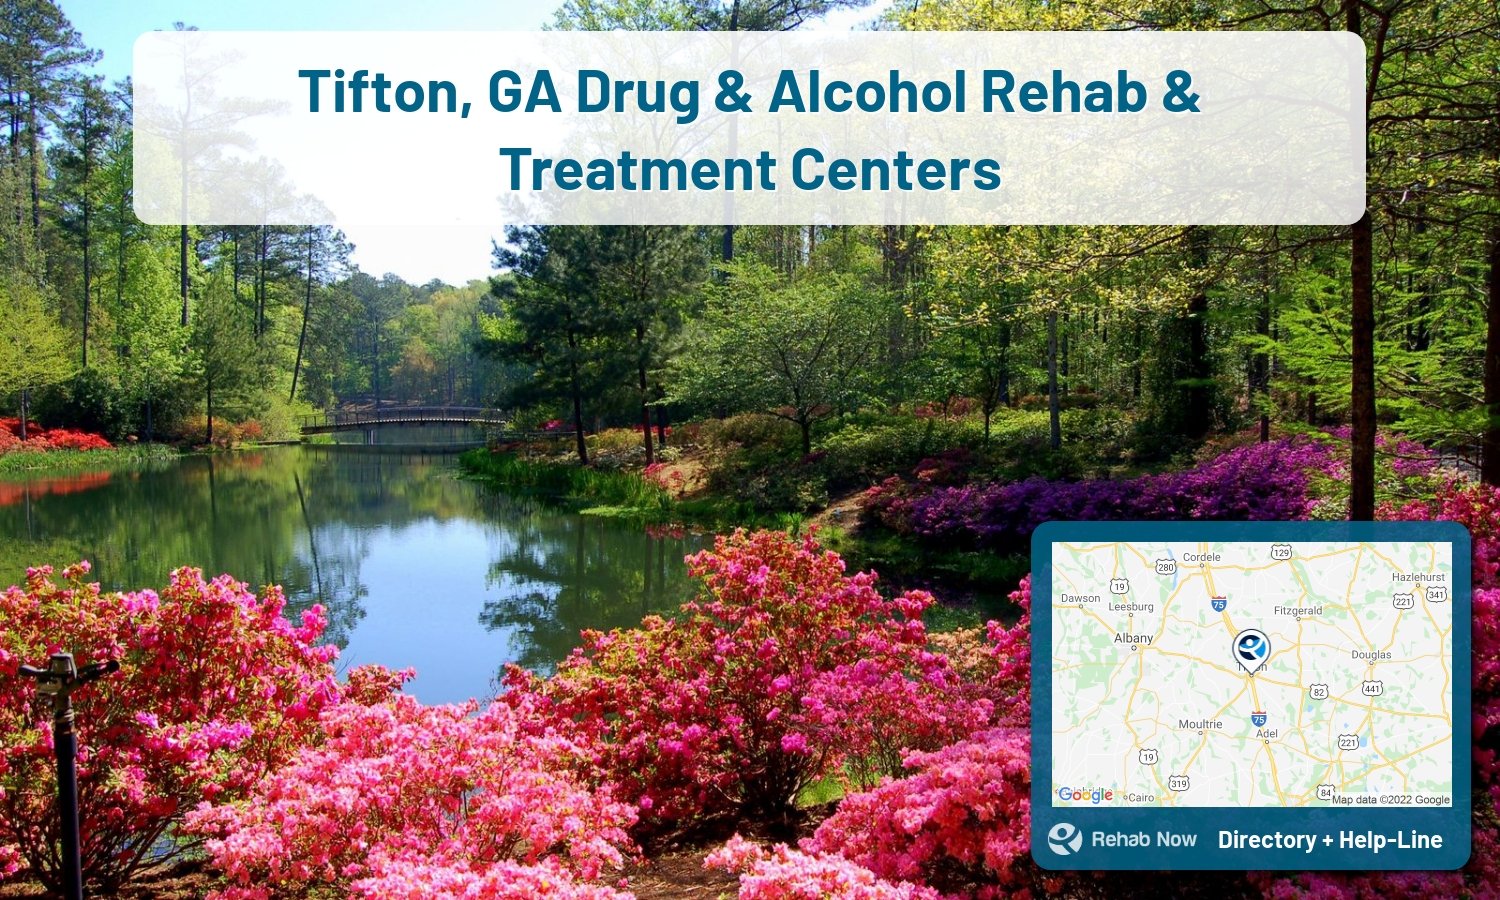 Our experts can help you find treatment now in Tifton, Georgia. We list drug rehab and alcohol centers in Georgia.